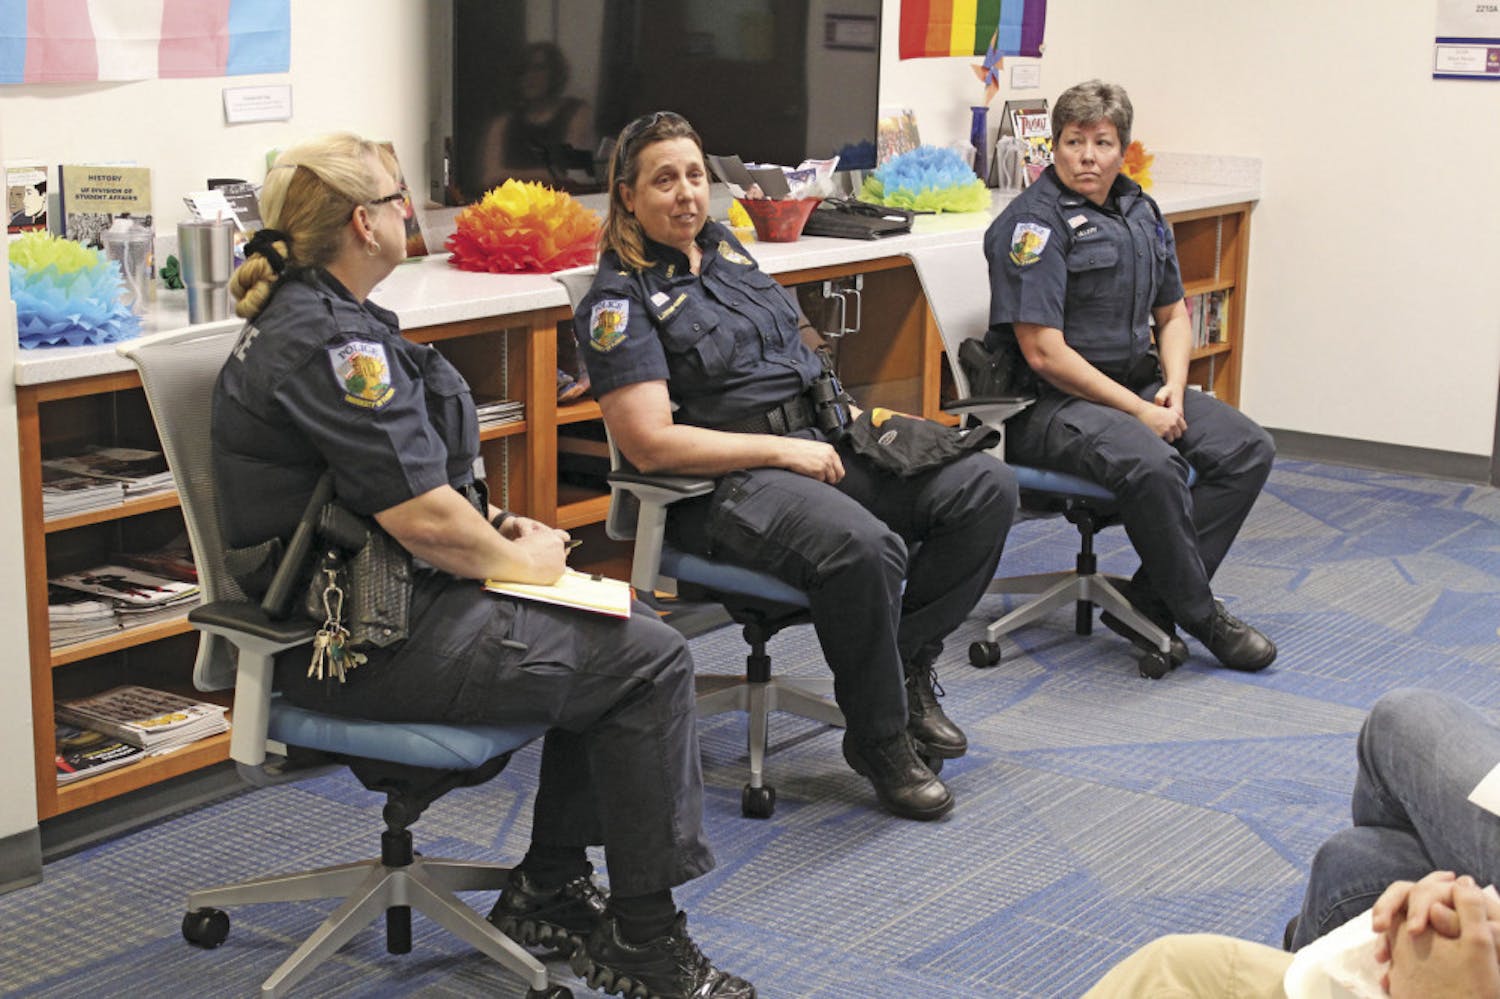 Officers Susan Pratt and Diana Ullery flank Chief Linda Stump-Kurnick as she answers a question at the University Police’s town hall in UF’s Rainbow Suite on Tuesday, February 7, 2017. The officers were there to answer questions from the students, but several students attended only to disrupt the event, interrupting with phrases such as, “Lay with pigs, wake up dirty.”